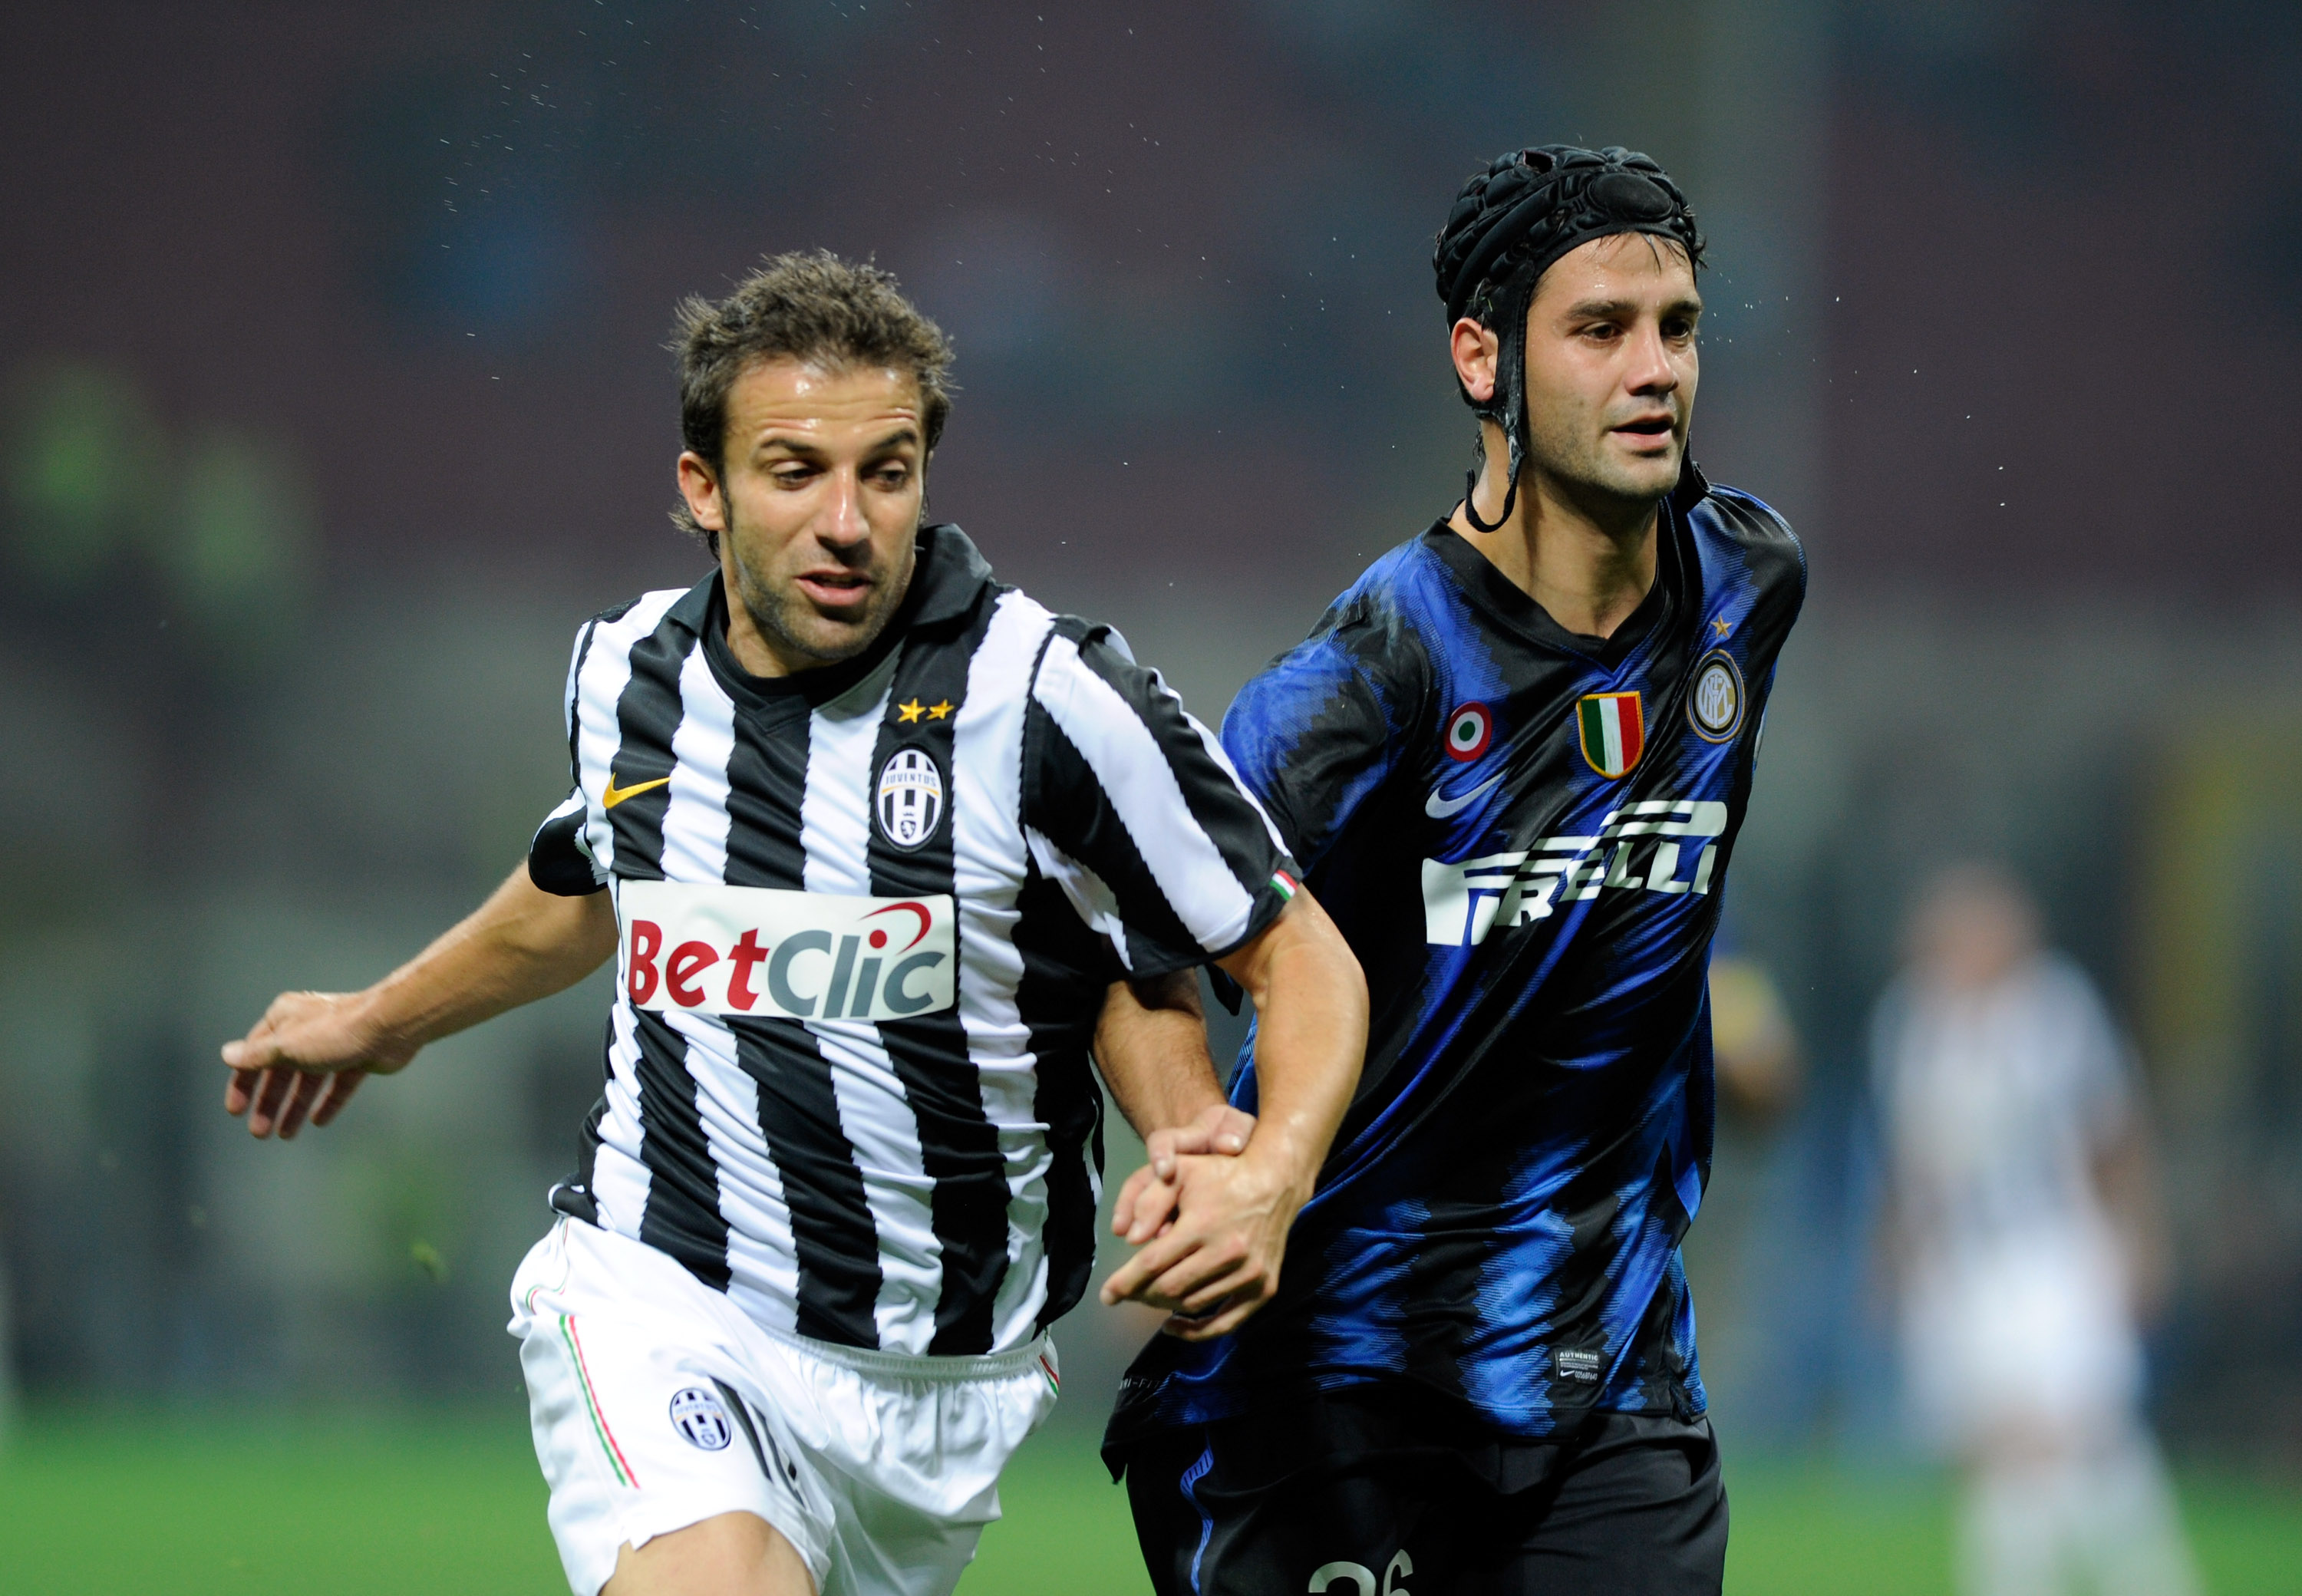 MILAN, ITALY - OCTOBER 03:  Christian Chivu of Inter Milan and Alessandro Del Piero of Juventus FC compete for the ball during the Serie A match between FC Internazionale Milano and Juventus FC at Stadio Giuseppe Meazza on October 3, 2010 in Milan, Italy.